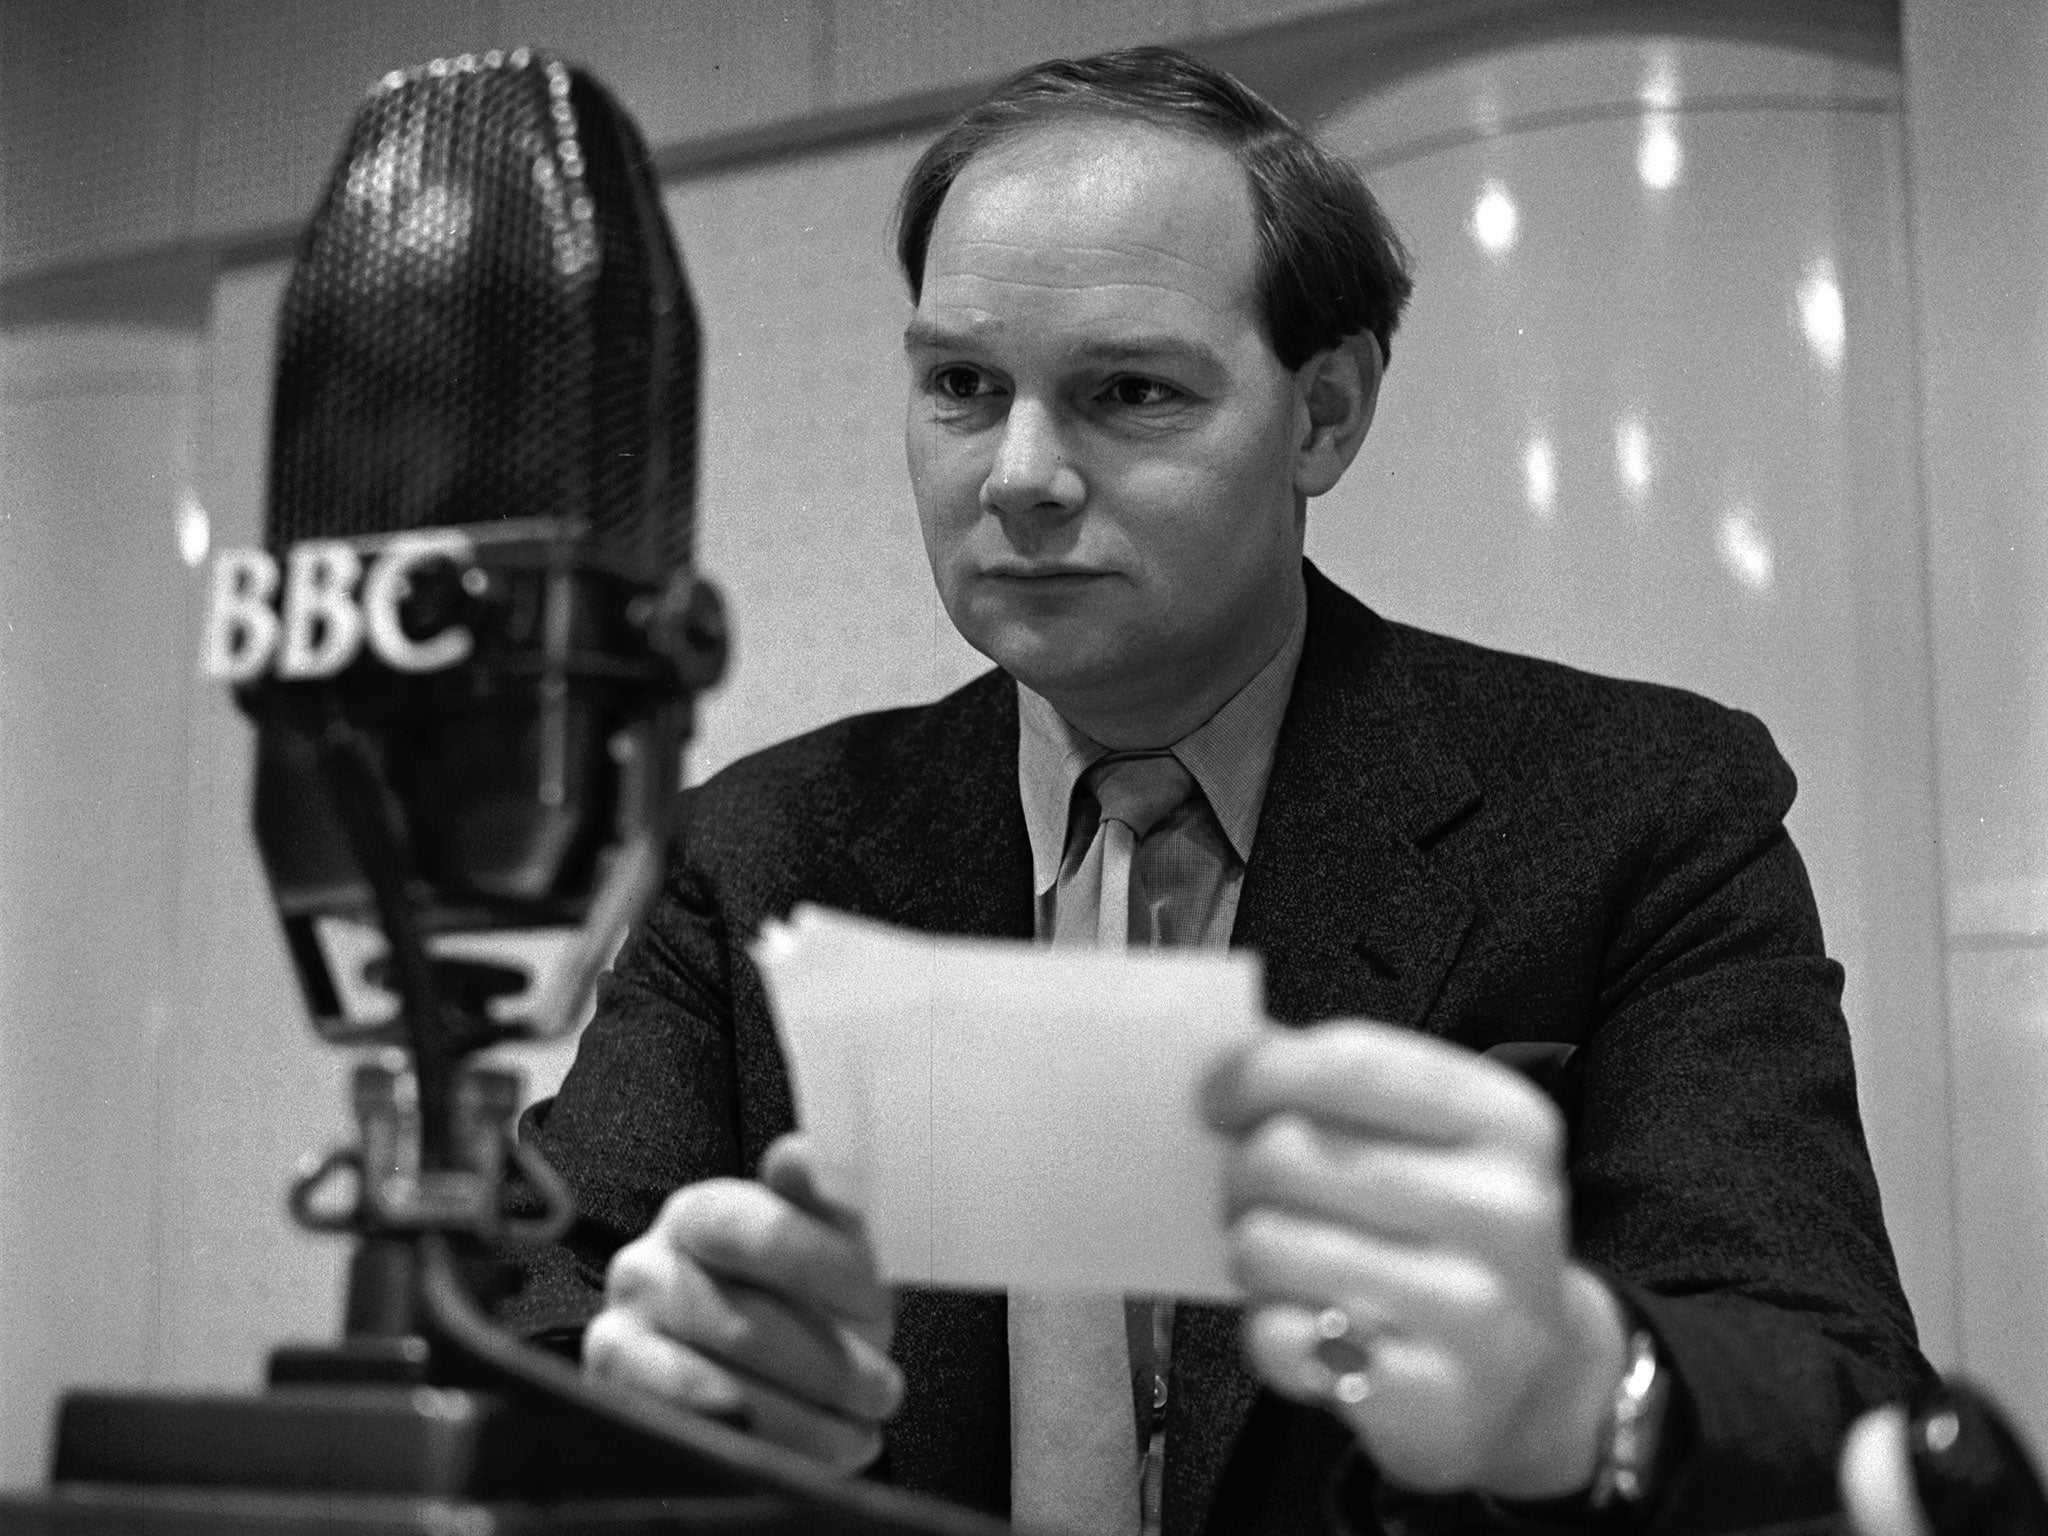 Michelmore reads out a request on ‘Housewives’ Choice’ in 1956